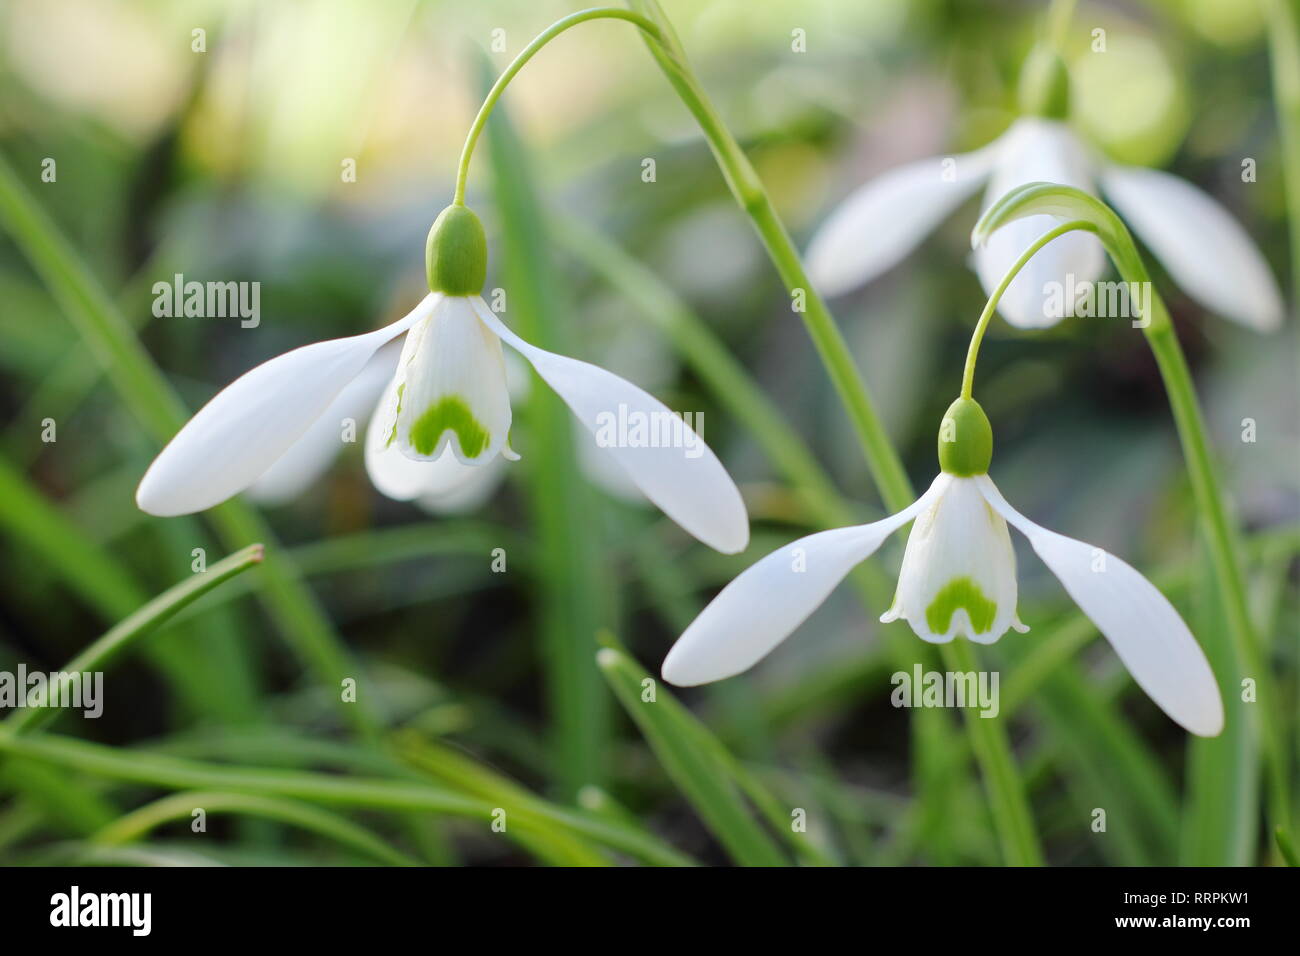 Galanthus 'Magnet snowdrop blooms in a winter garden, UK. AGM. Noted for comparatively long, arching pedicel. Stock Photo